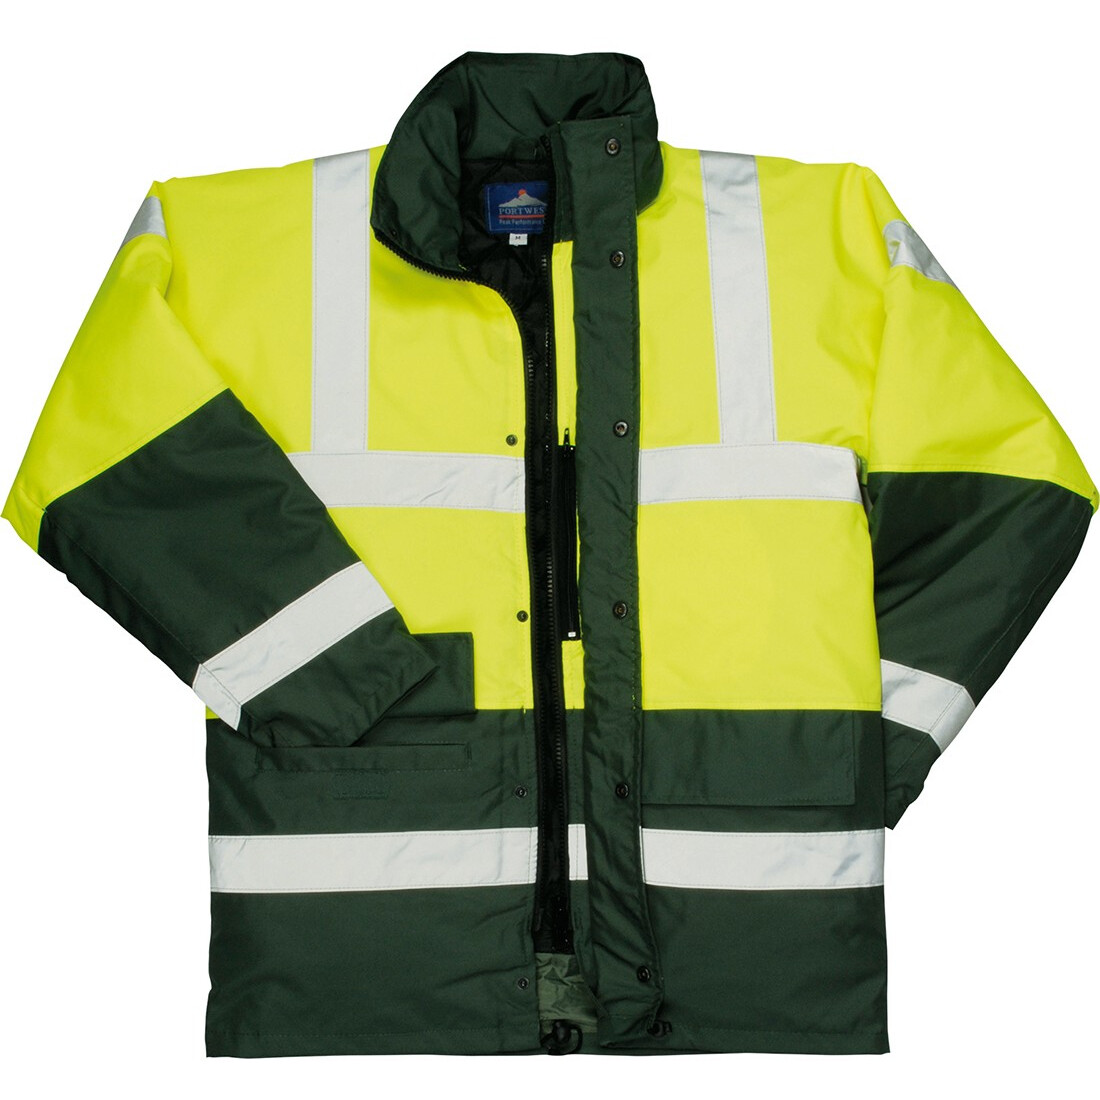 Portwest S466 Hi-Vis Contrast Traffic Jacket from Lawson HIS